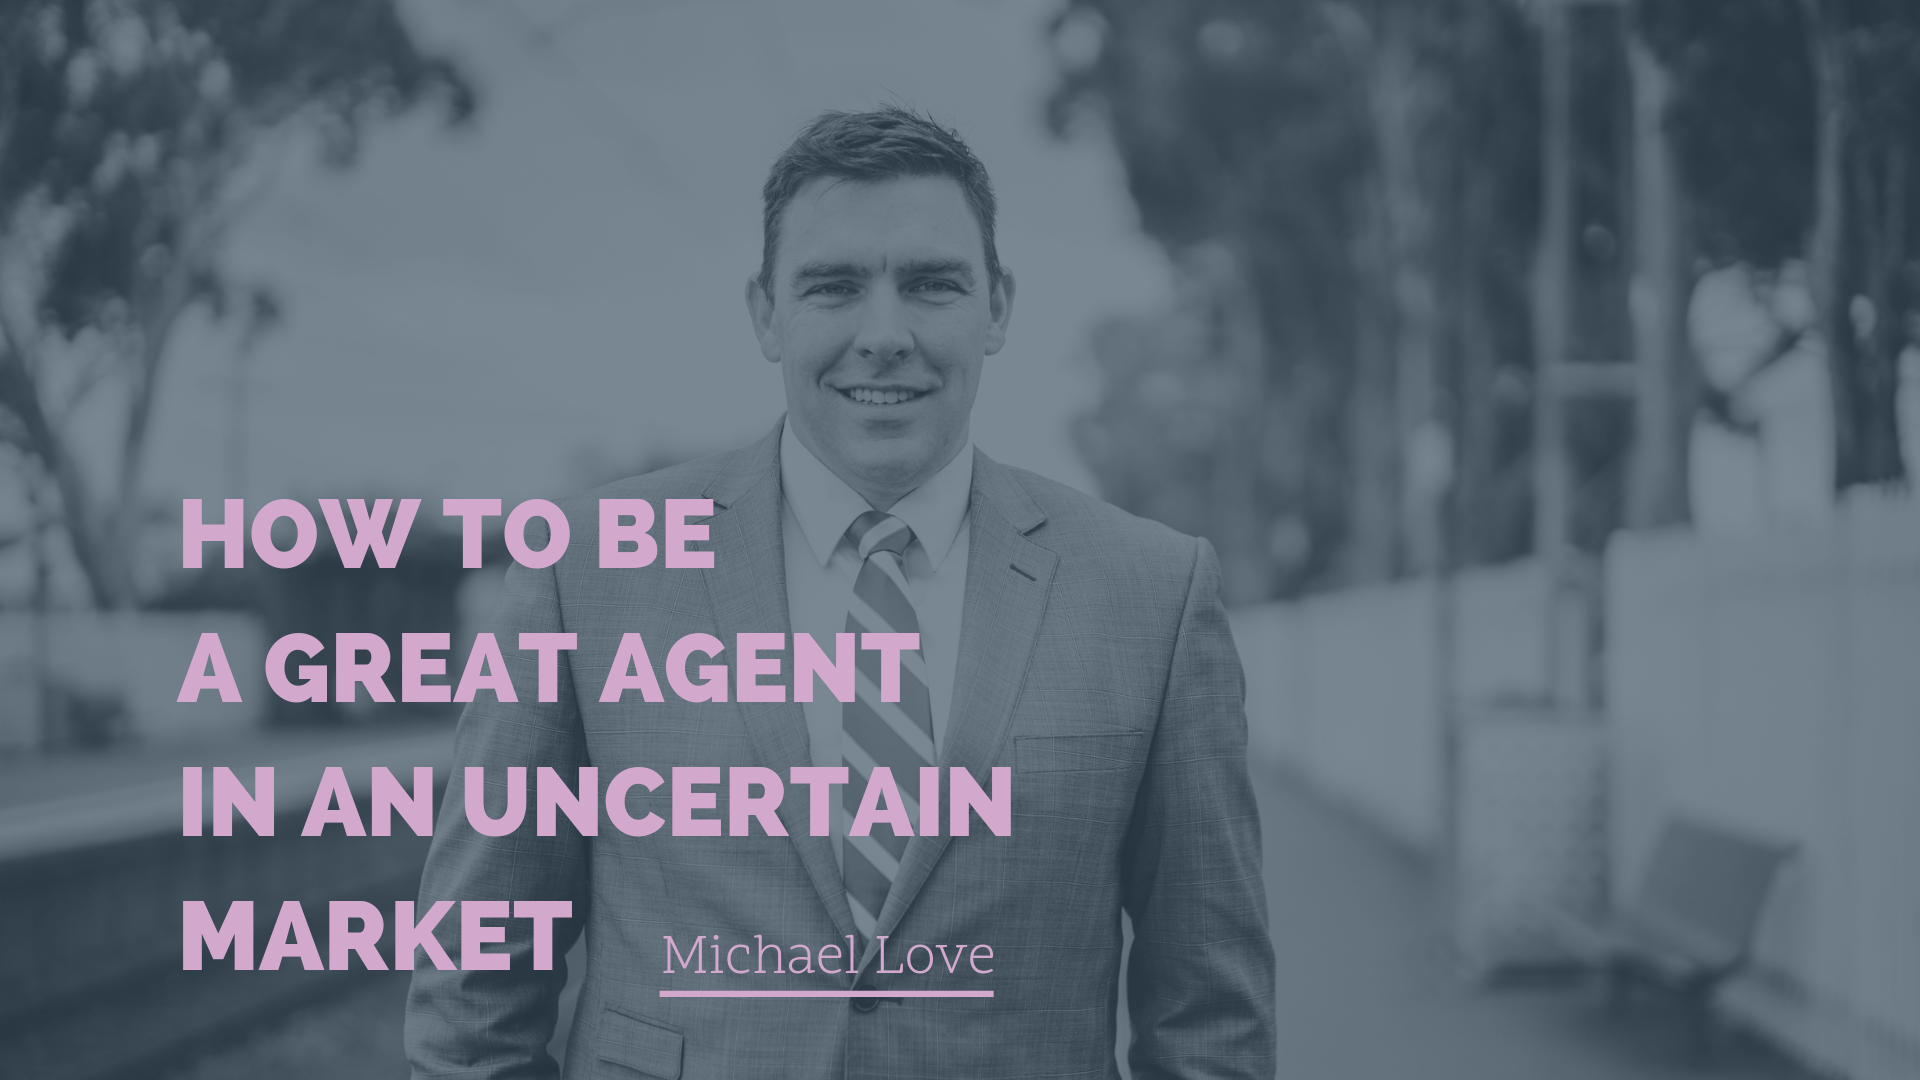 How to Be a Great Agent in an Uncertain Market